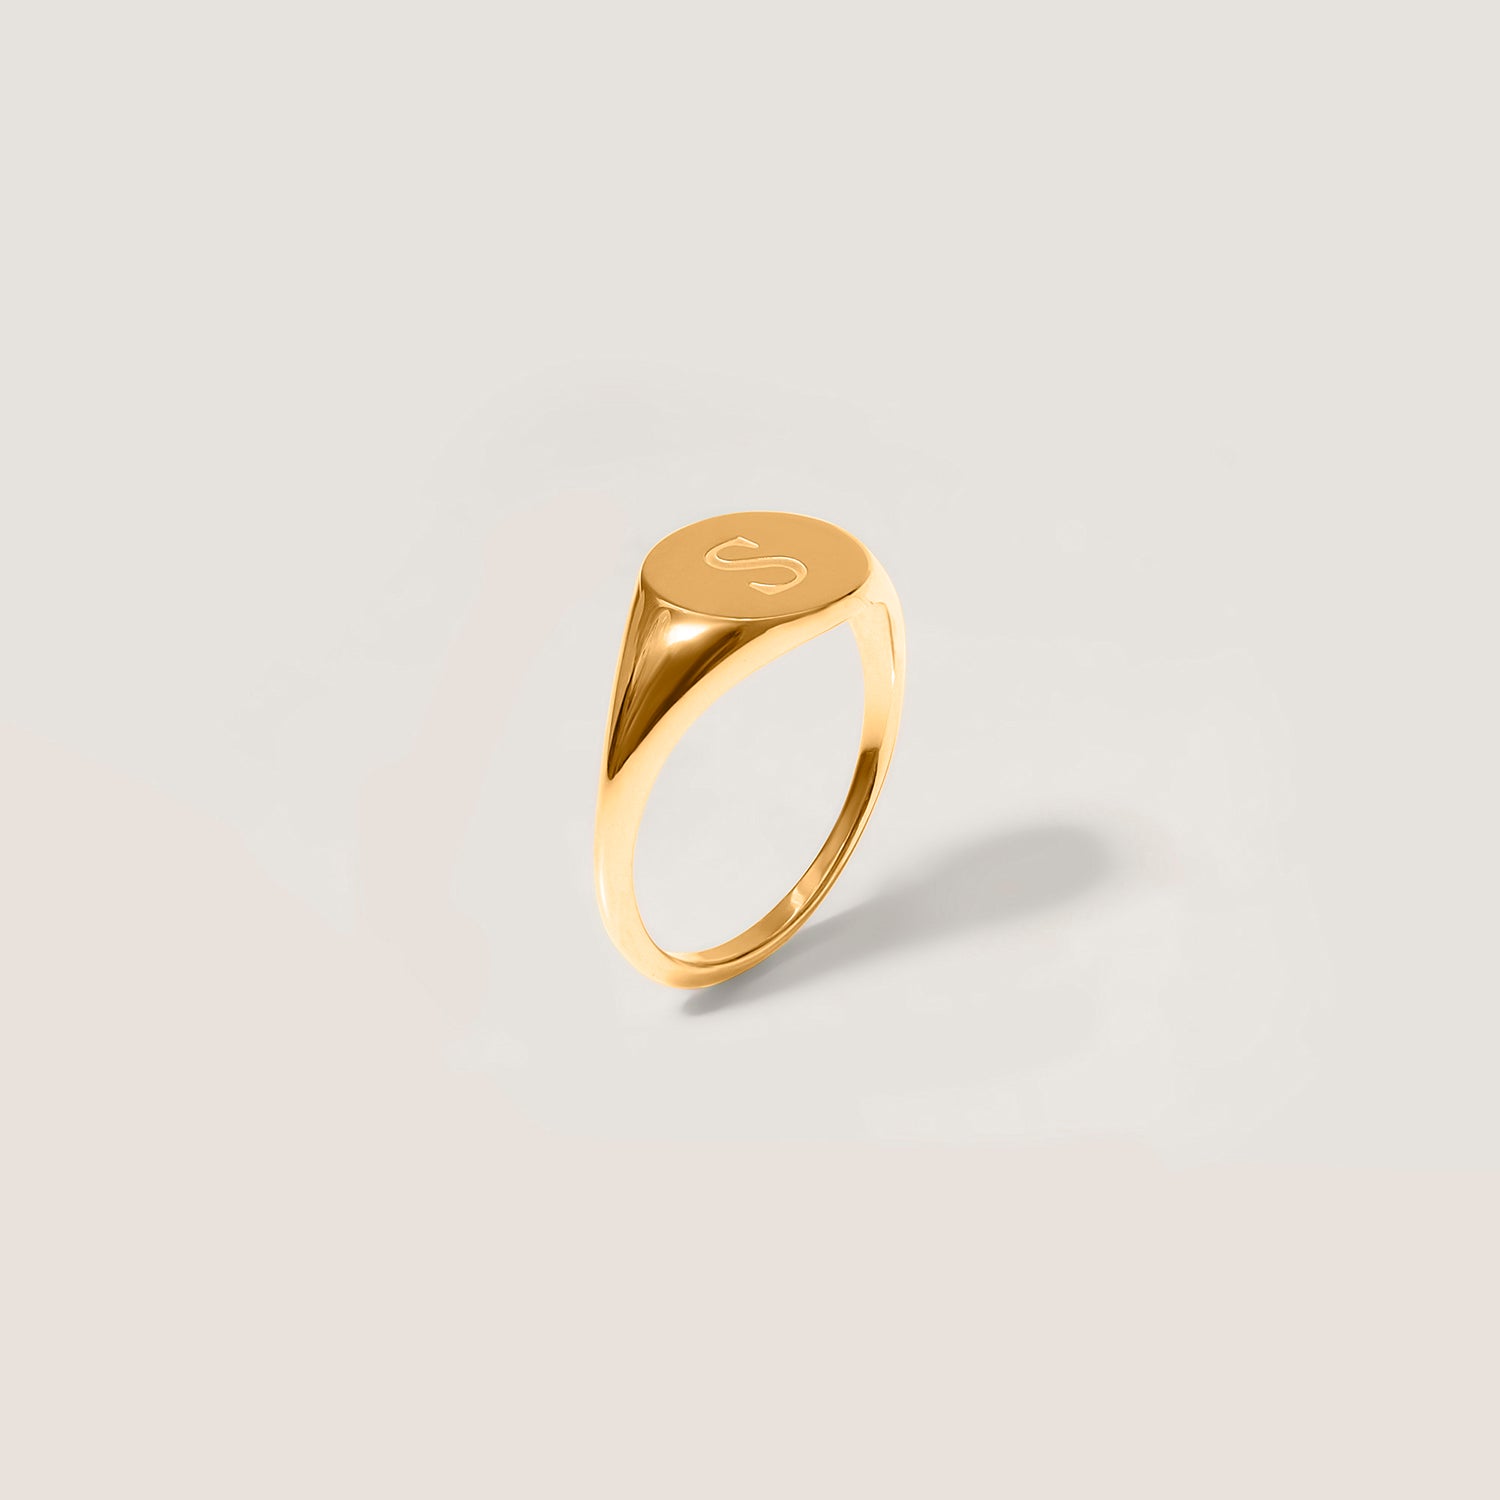 Engravable Pinky Signet Ring